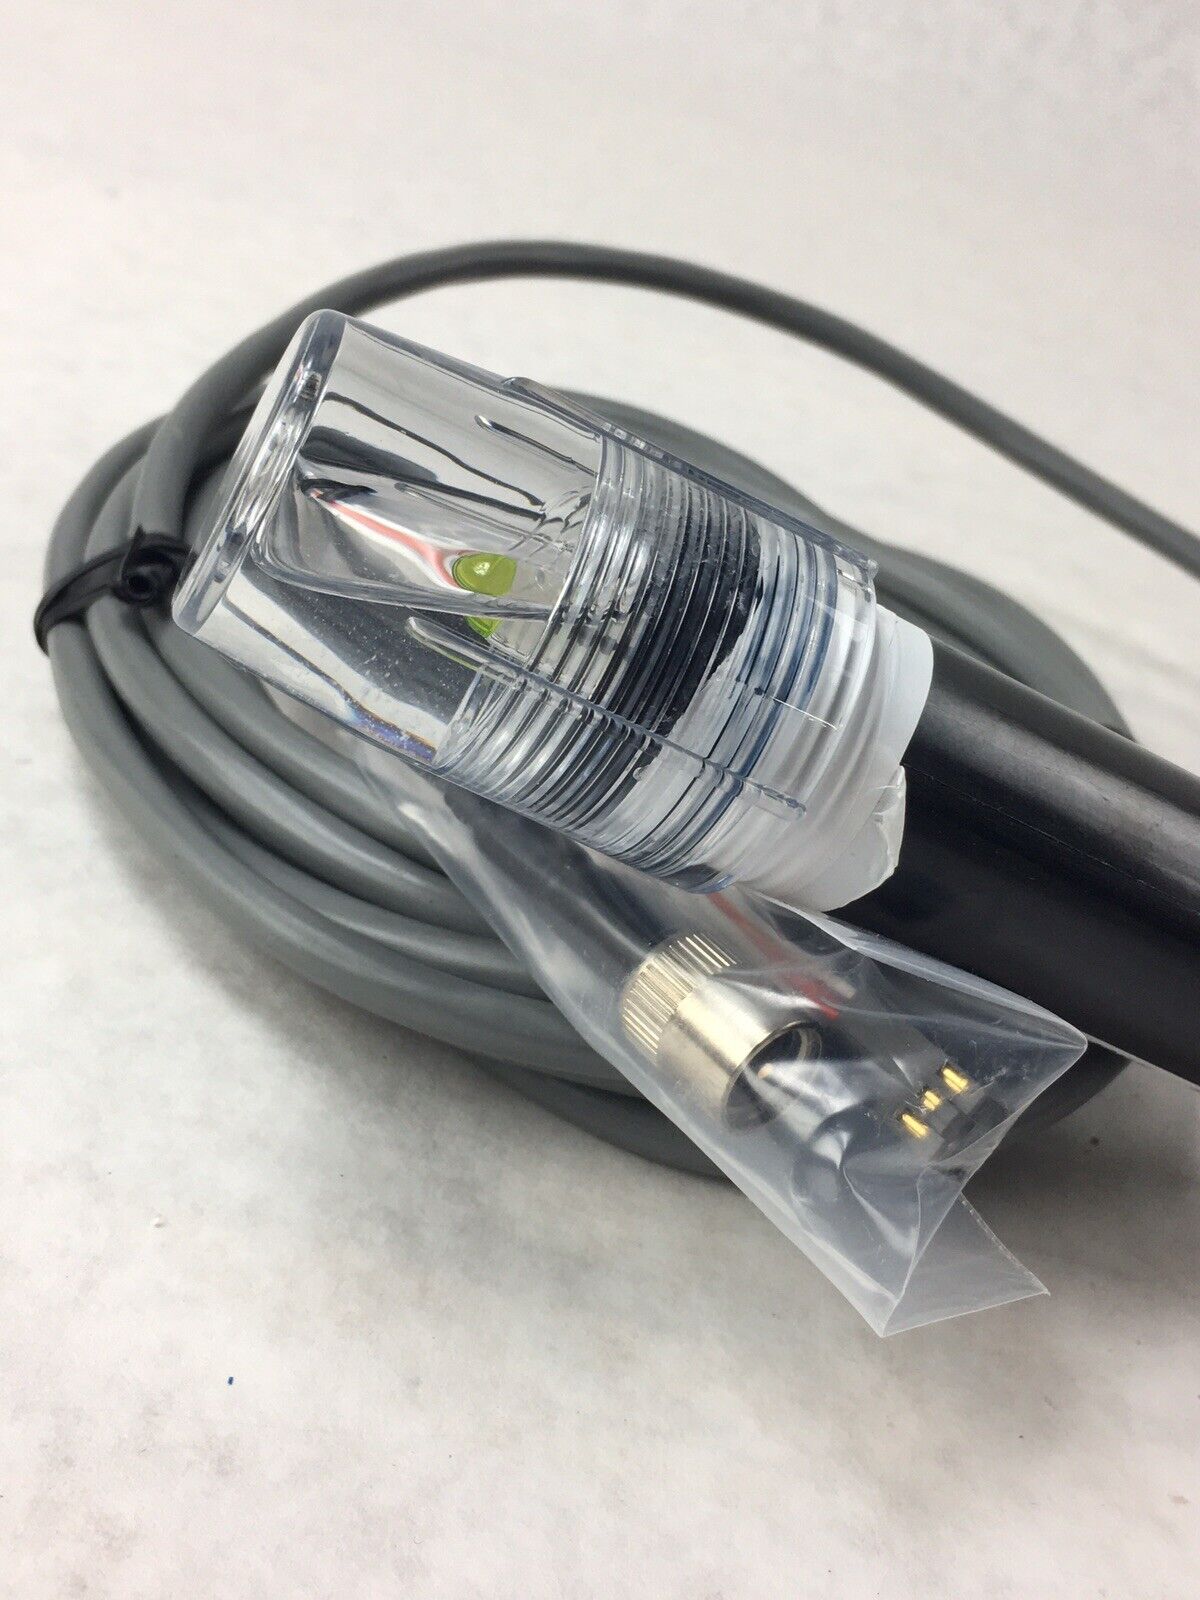 Honeywell 31074399-501 pH Electrode 12' Preamp Cable